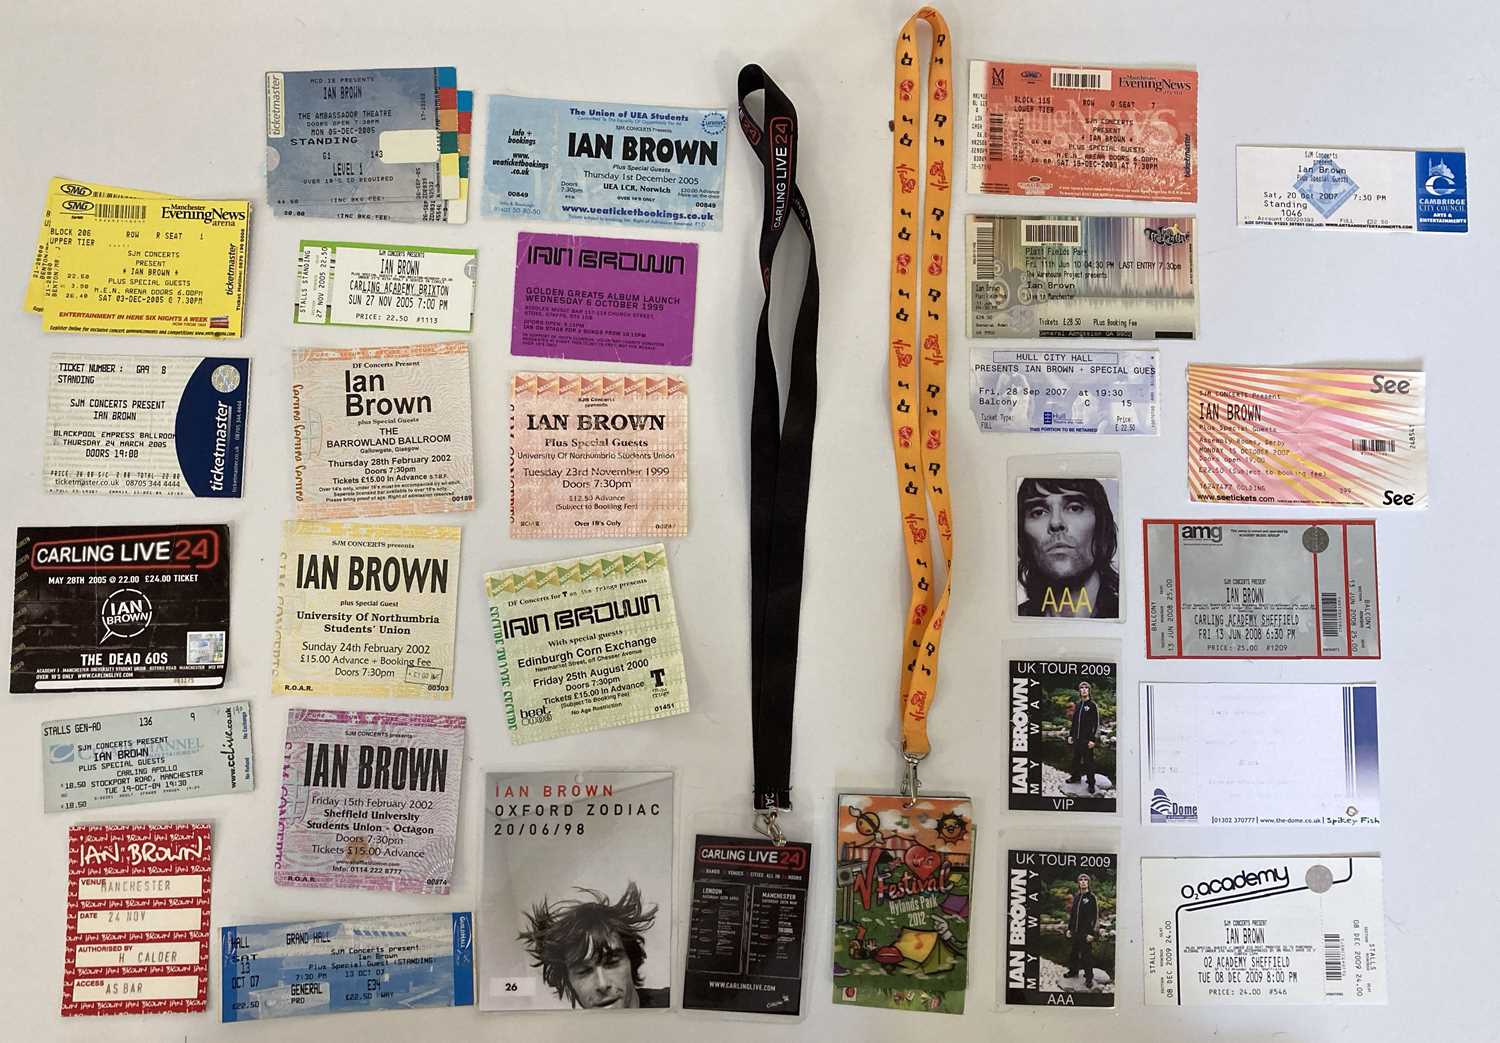 IAN BROWN TICKETS AND PASSES.